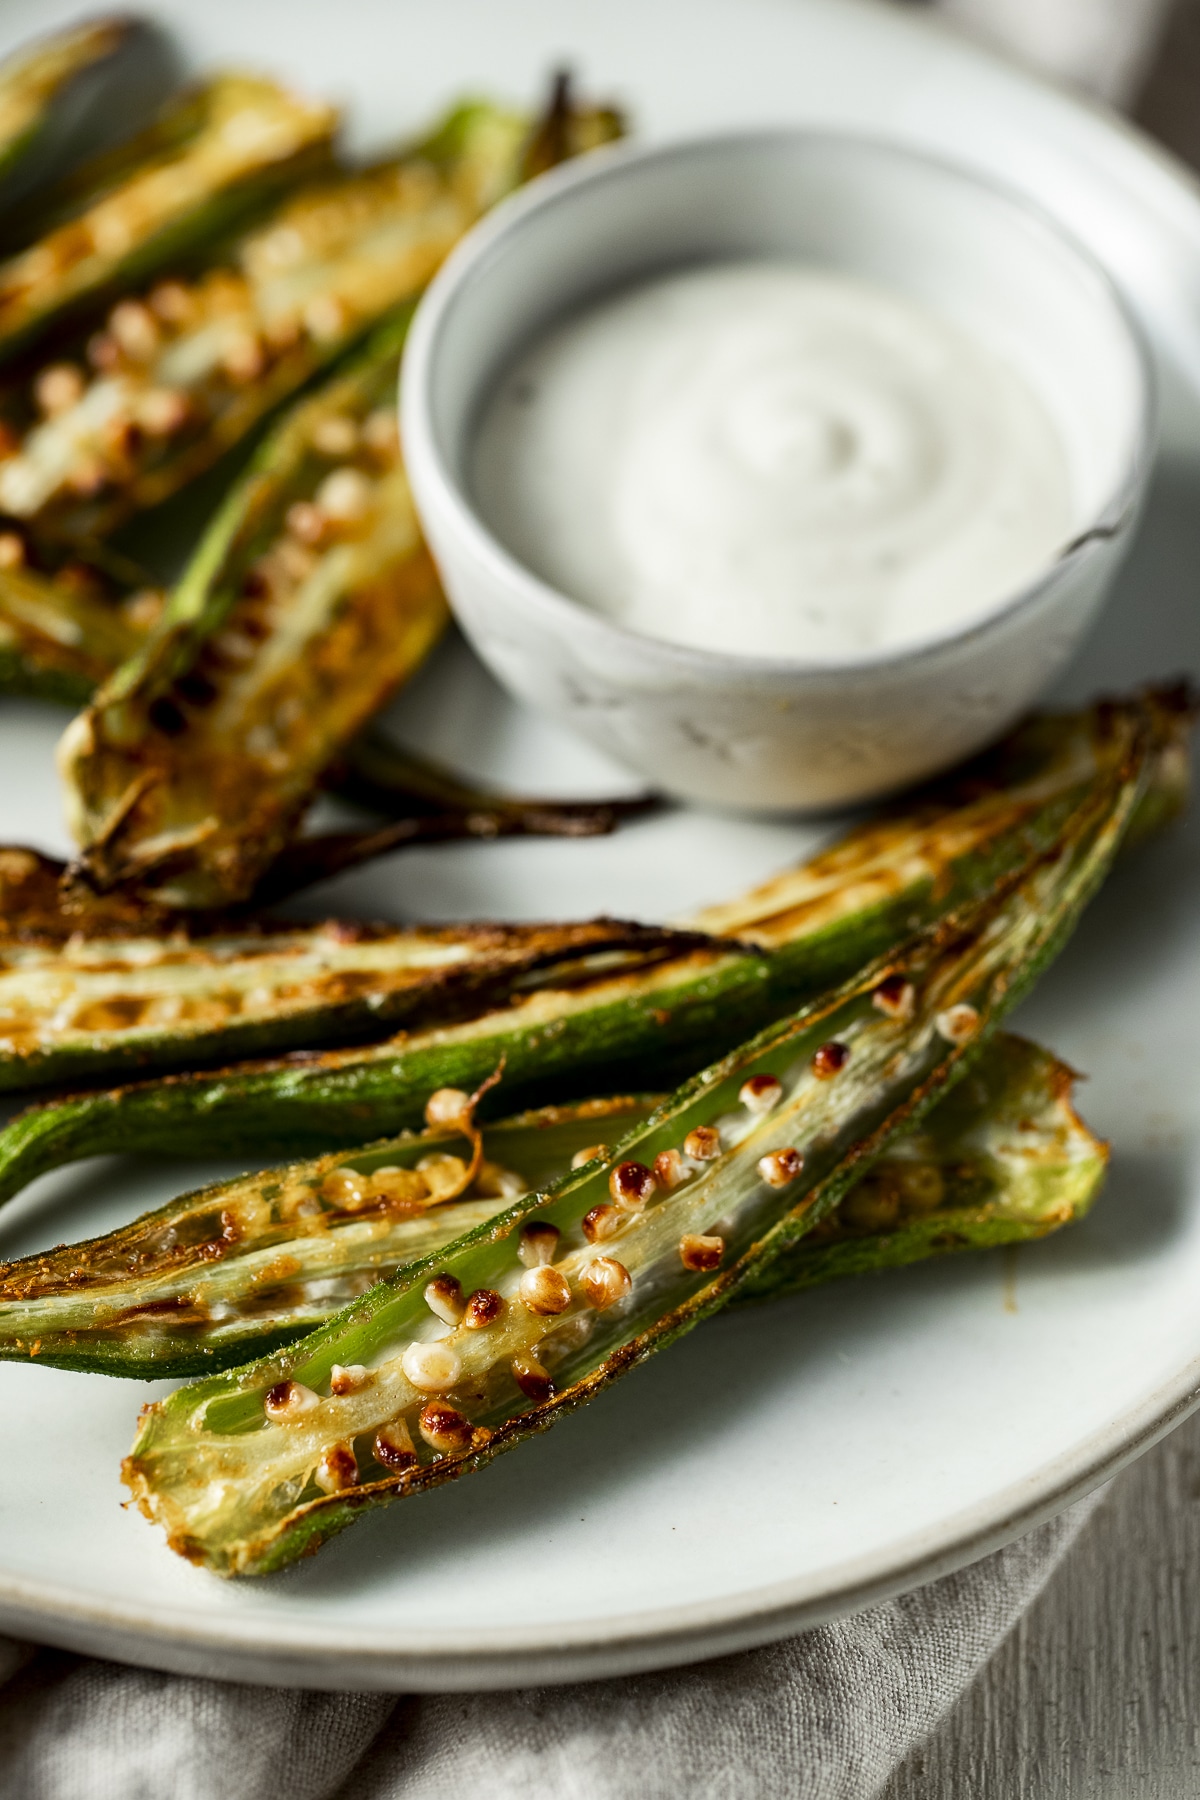 Okra fries on a plate with a small bowl of dipping sauce.